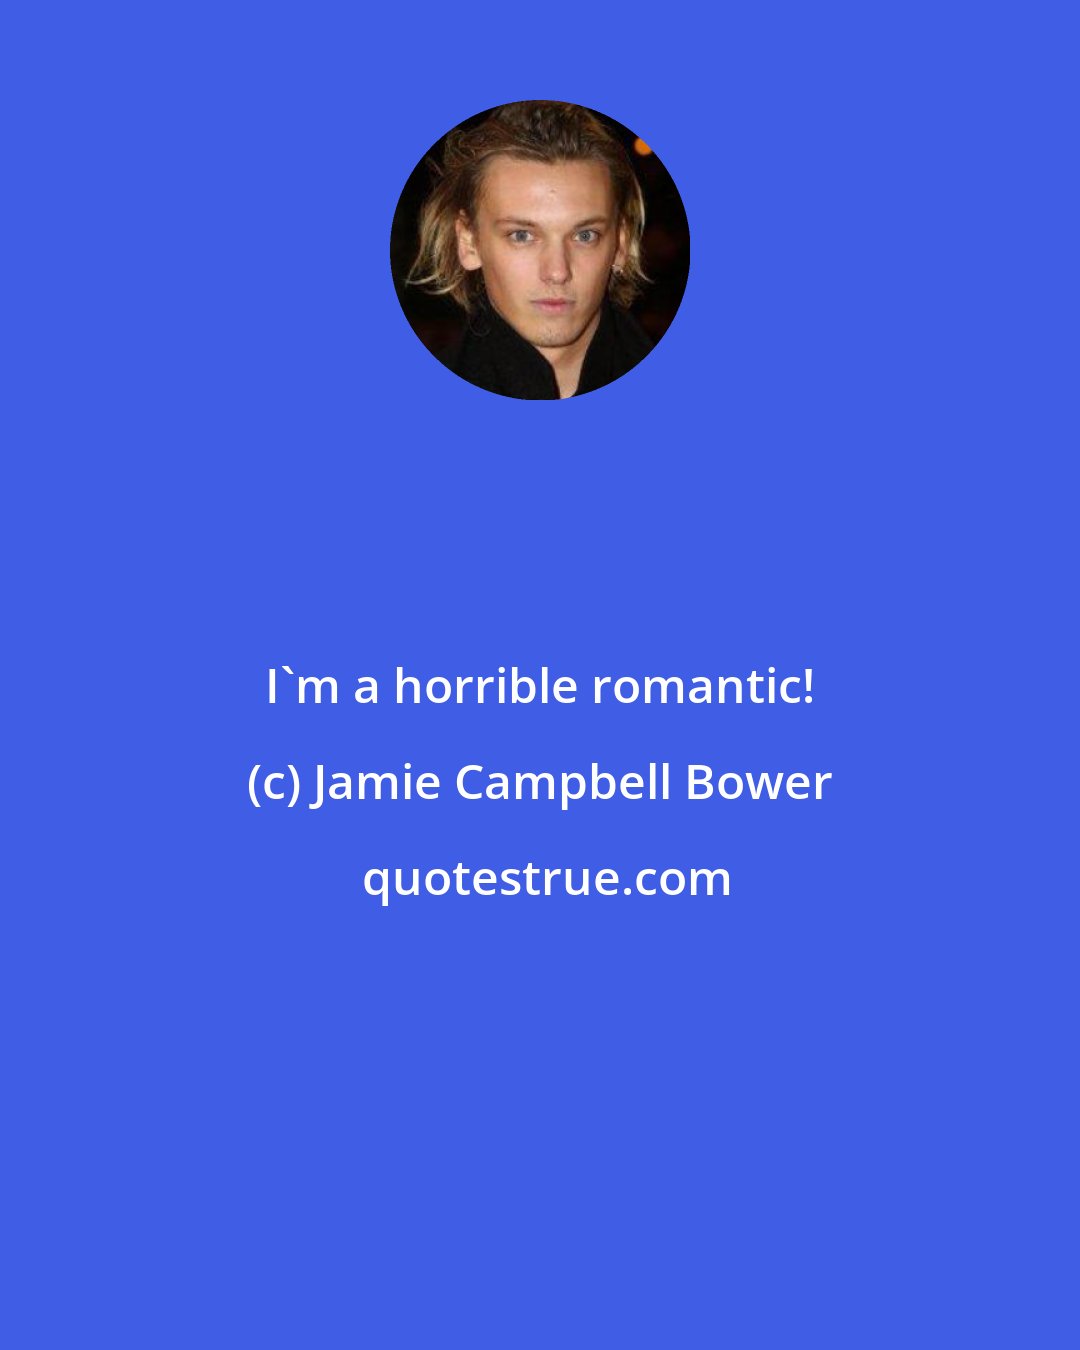 Jamie Campbell Bower: I'm a horrible romantic!